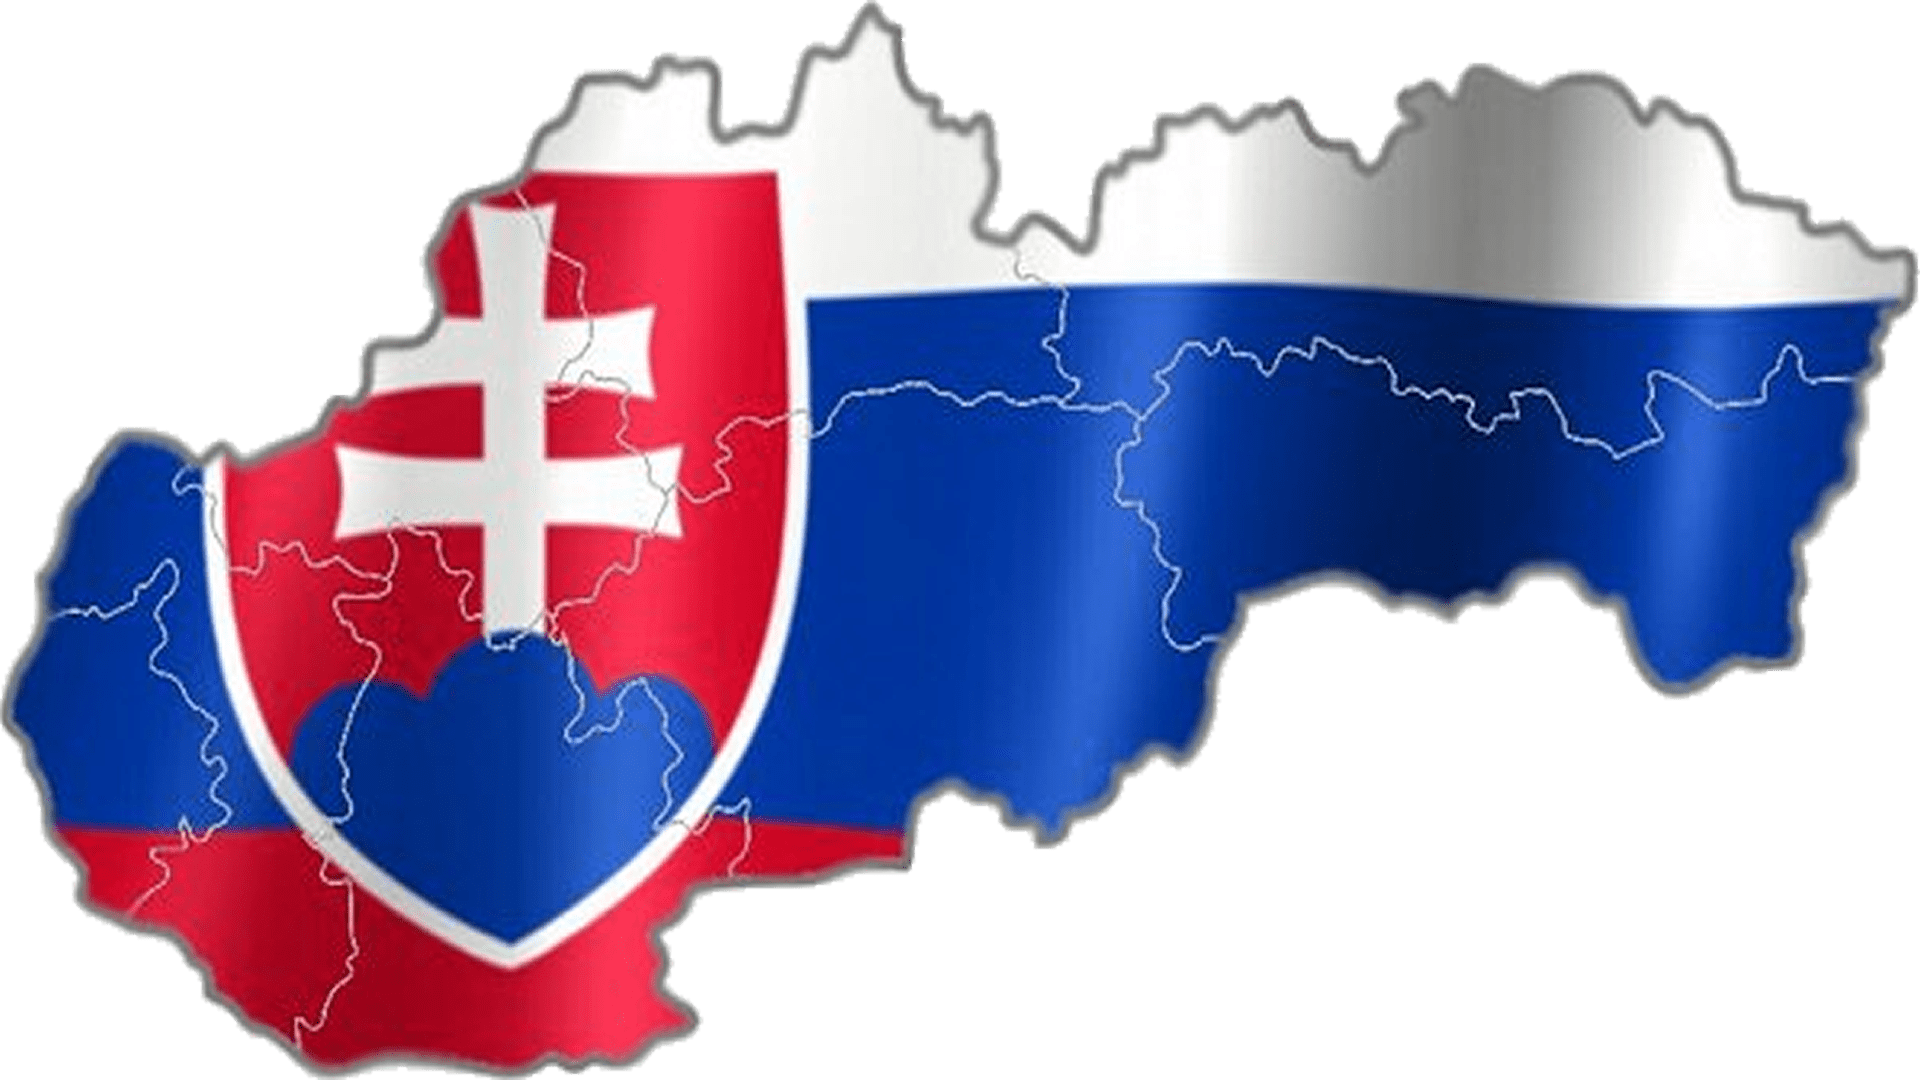 display of the Slovak flag in the map of the Slovak Republic divided by regions